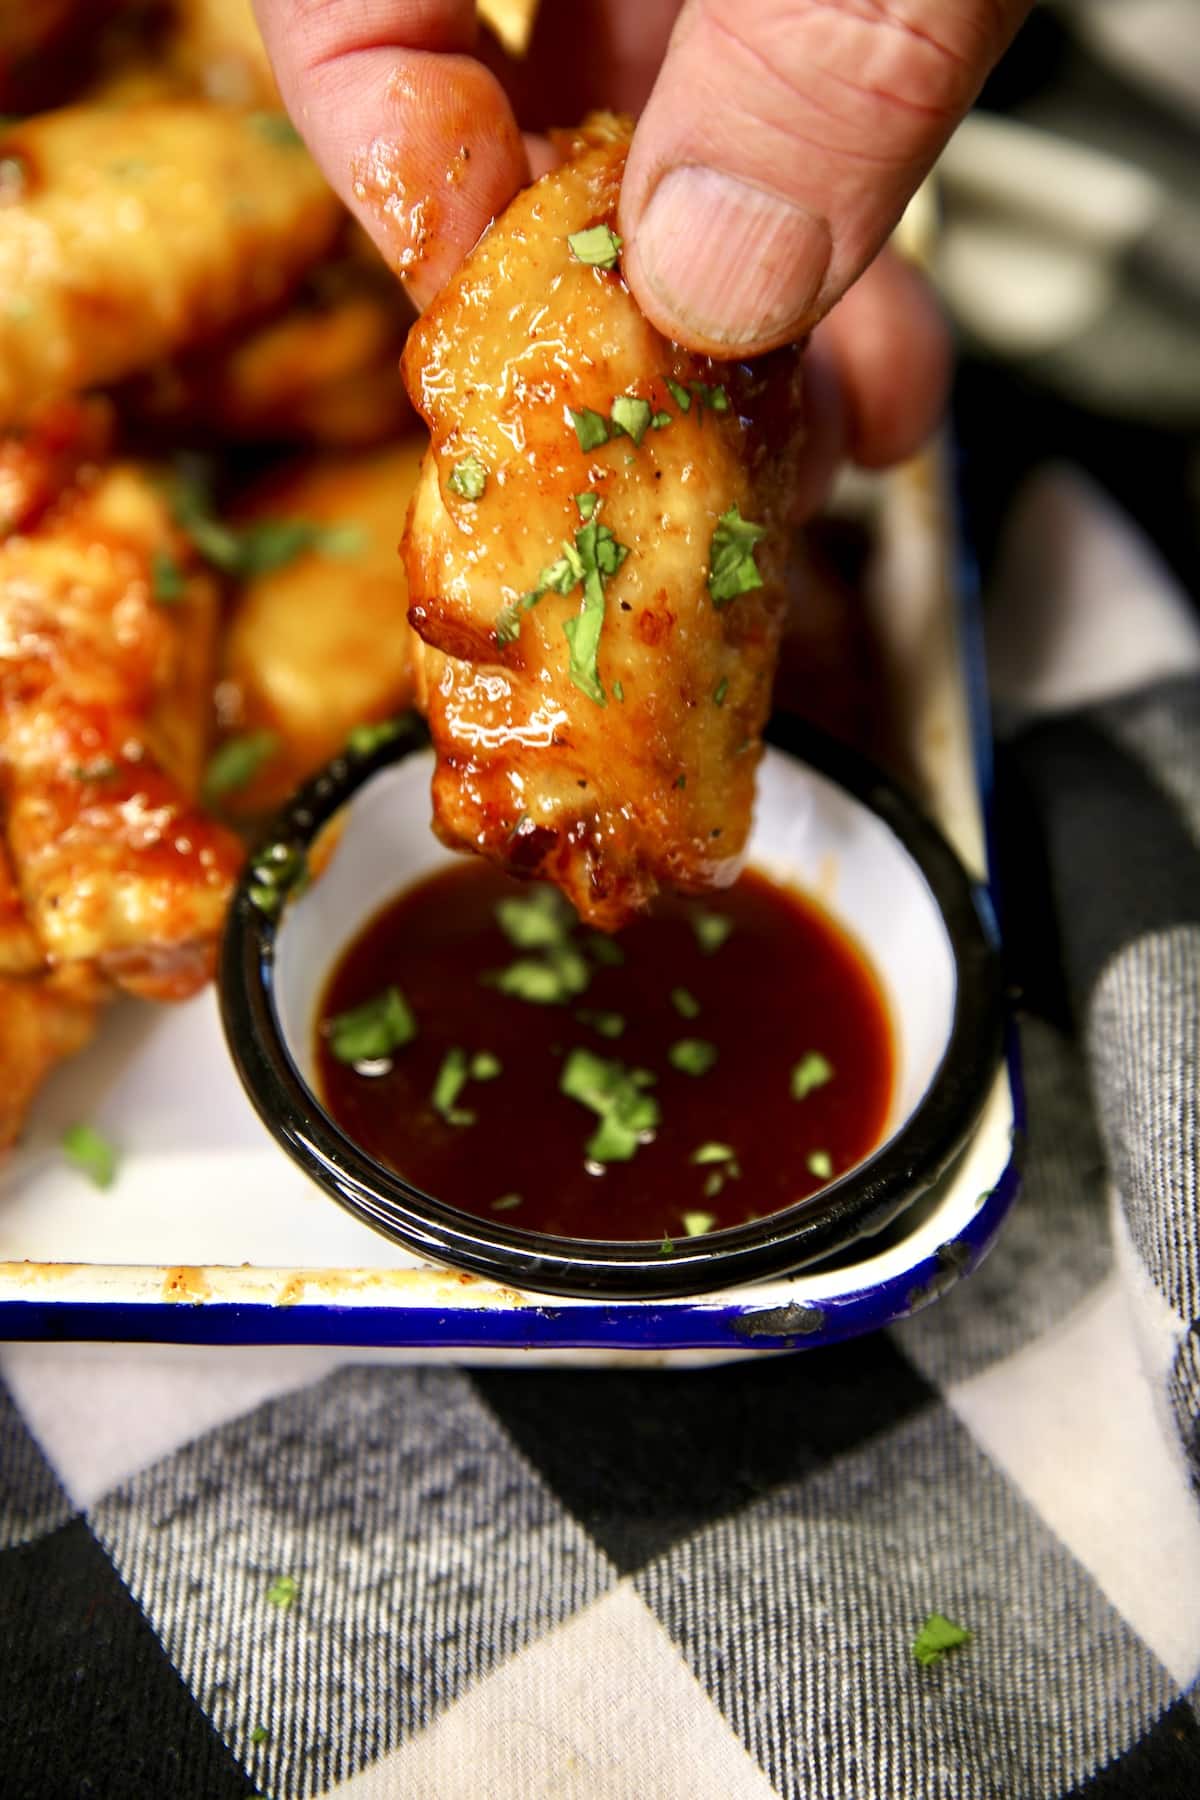 Dipping chicken wing into peach bbq sauce.